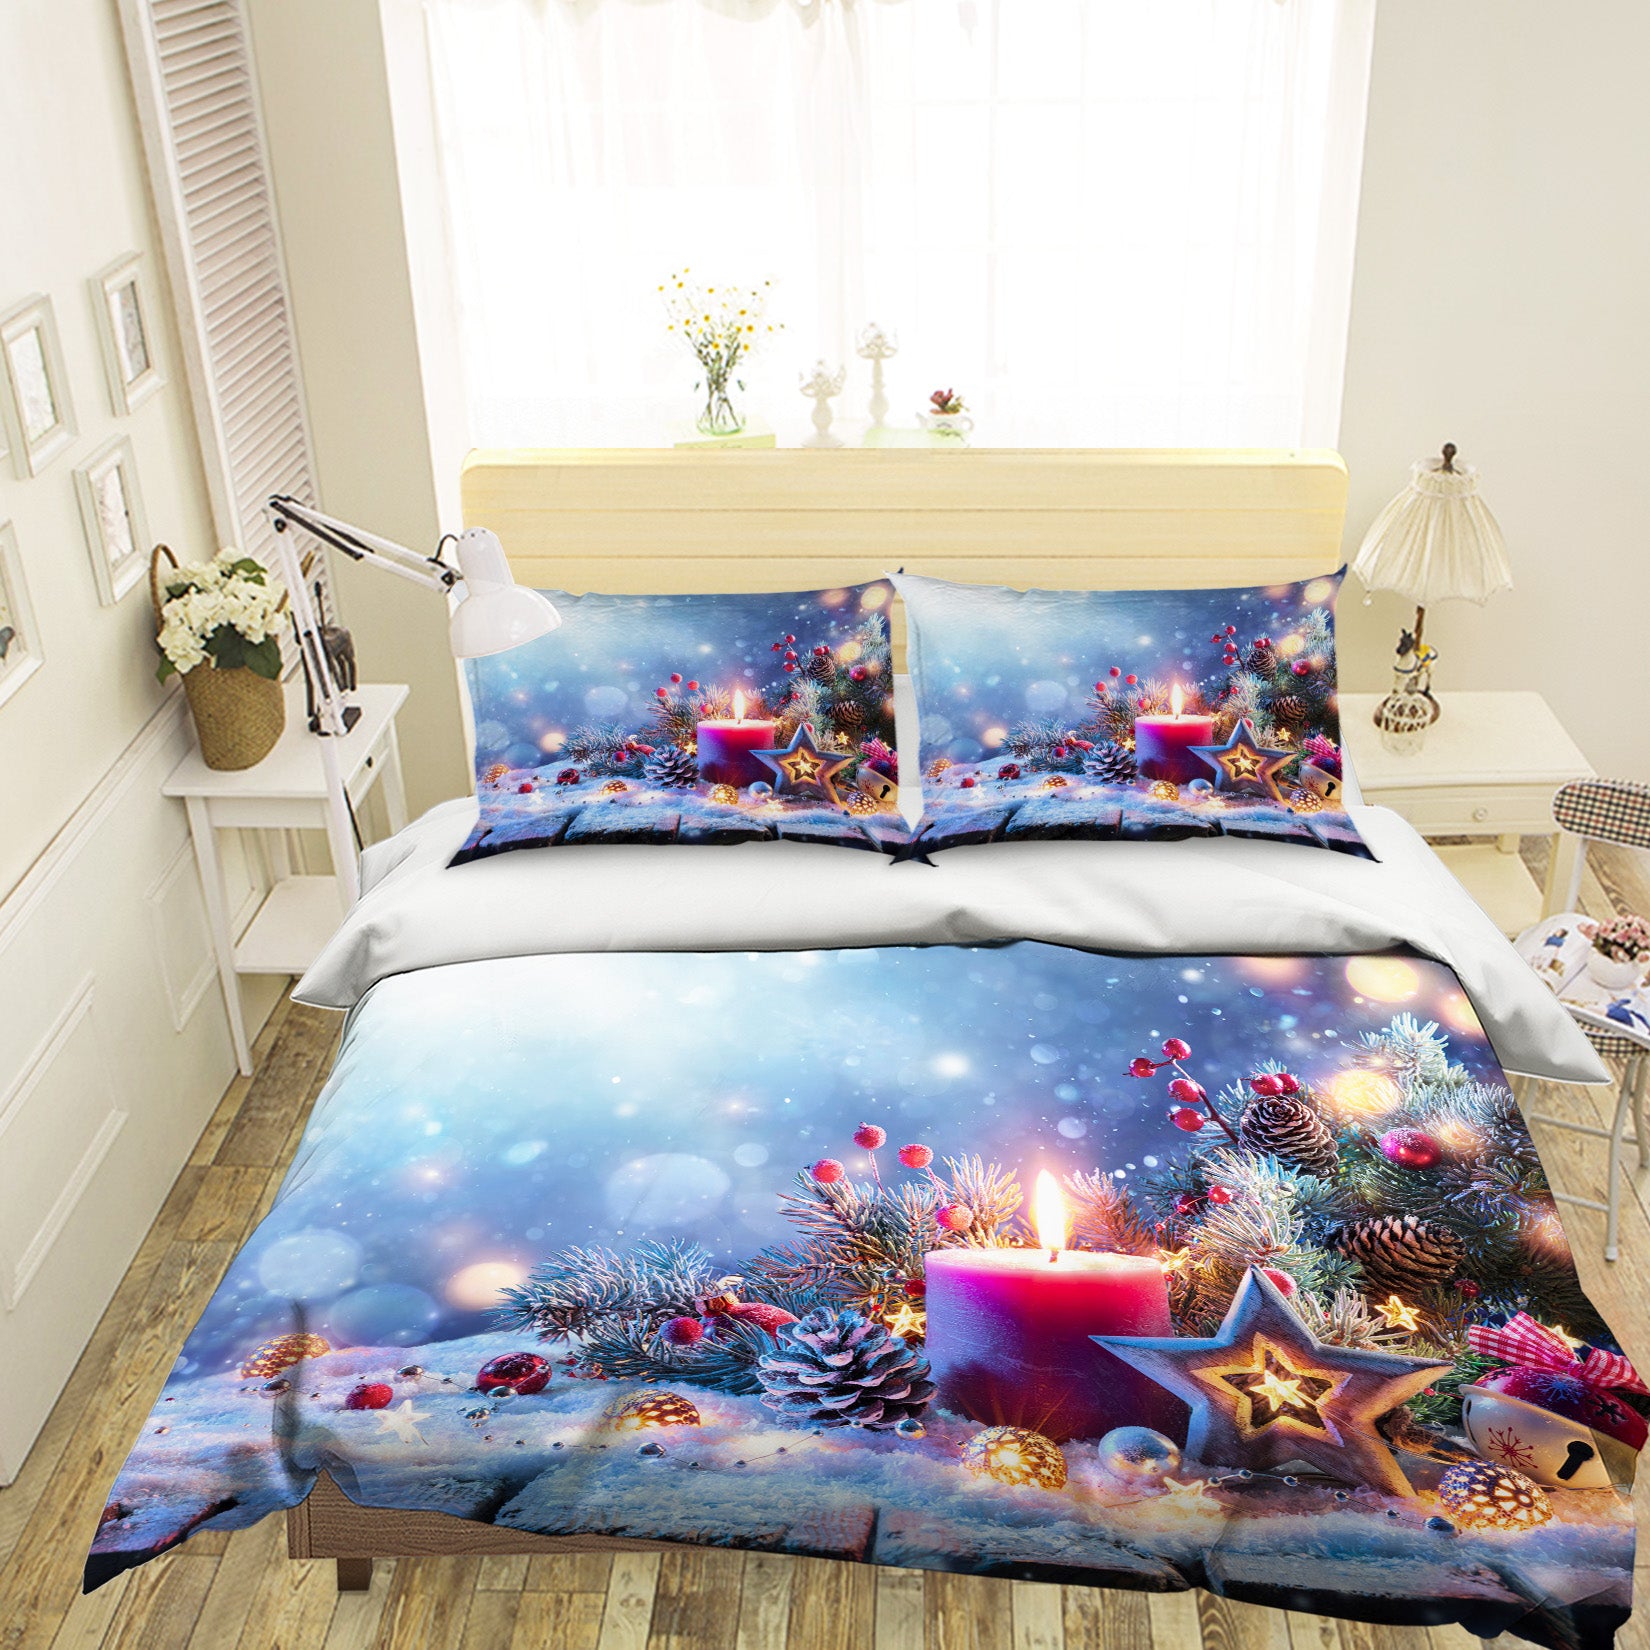 3D Candle Snow 53049 Christmas Quilt Duvet Cover Xmas Bed Pillowcases